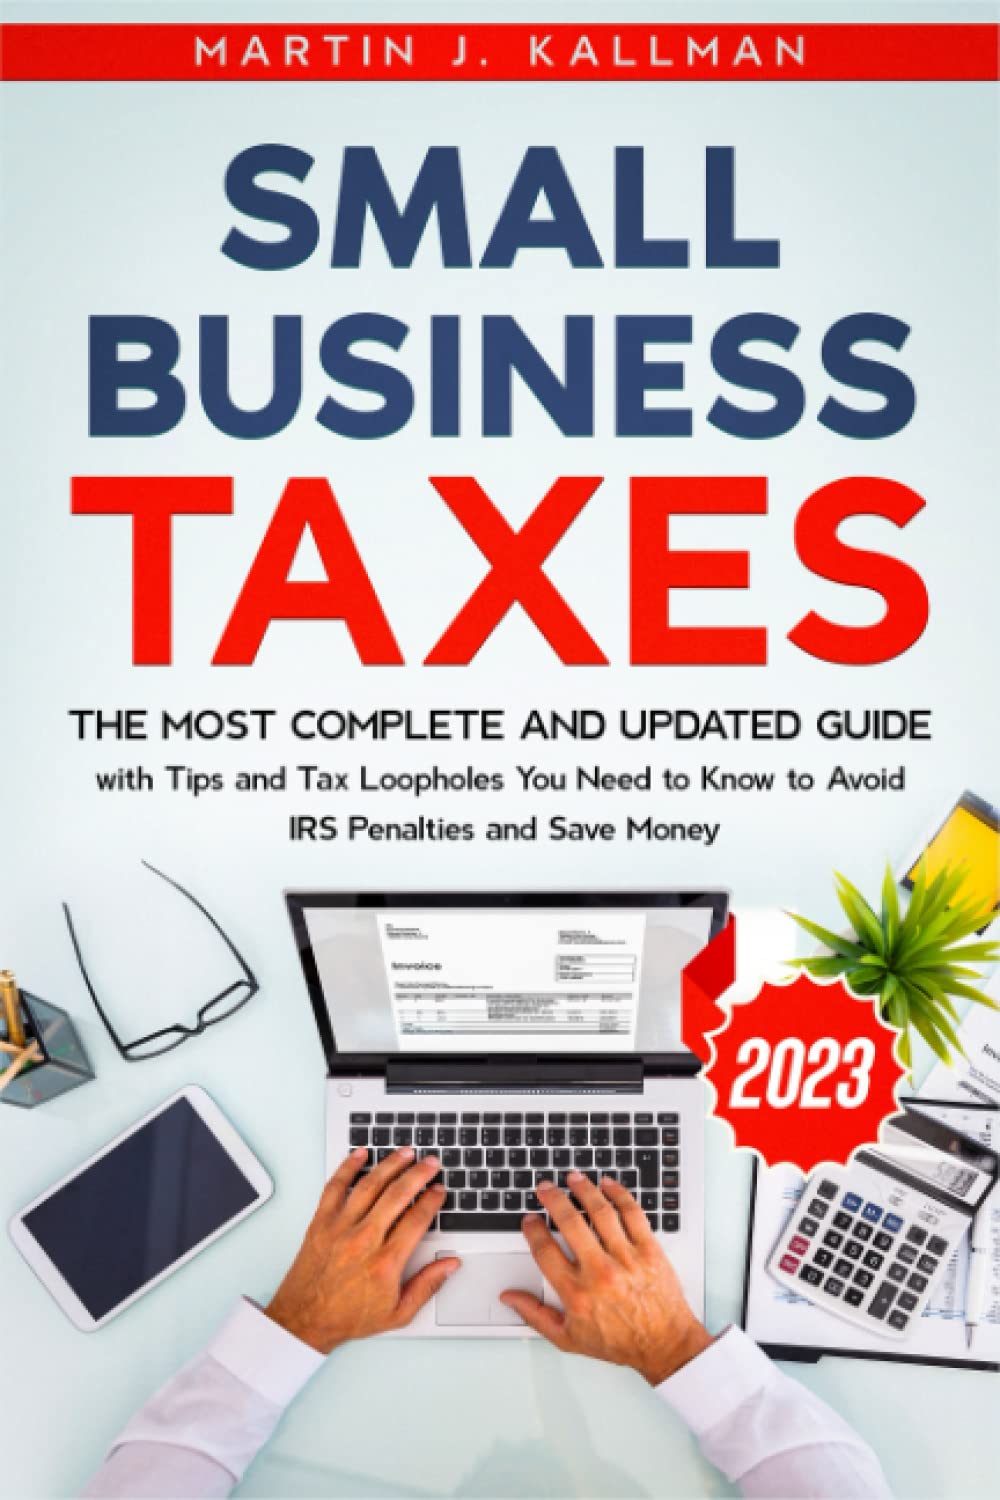 Small Business Taxes: The Most Complete and Updated Guide with Tips and Tax Loopholes You Need to Know to Avoid IRS Penalties and Save Money